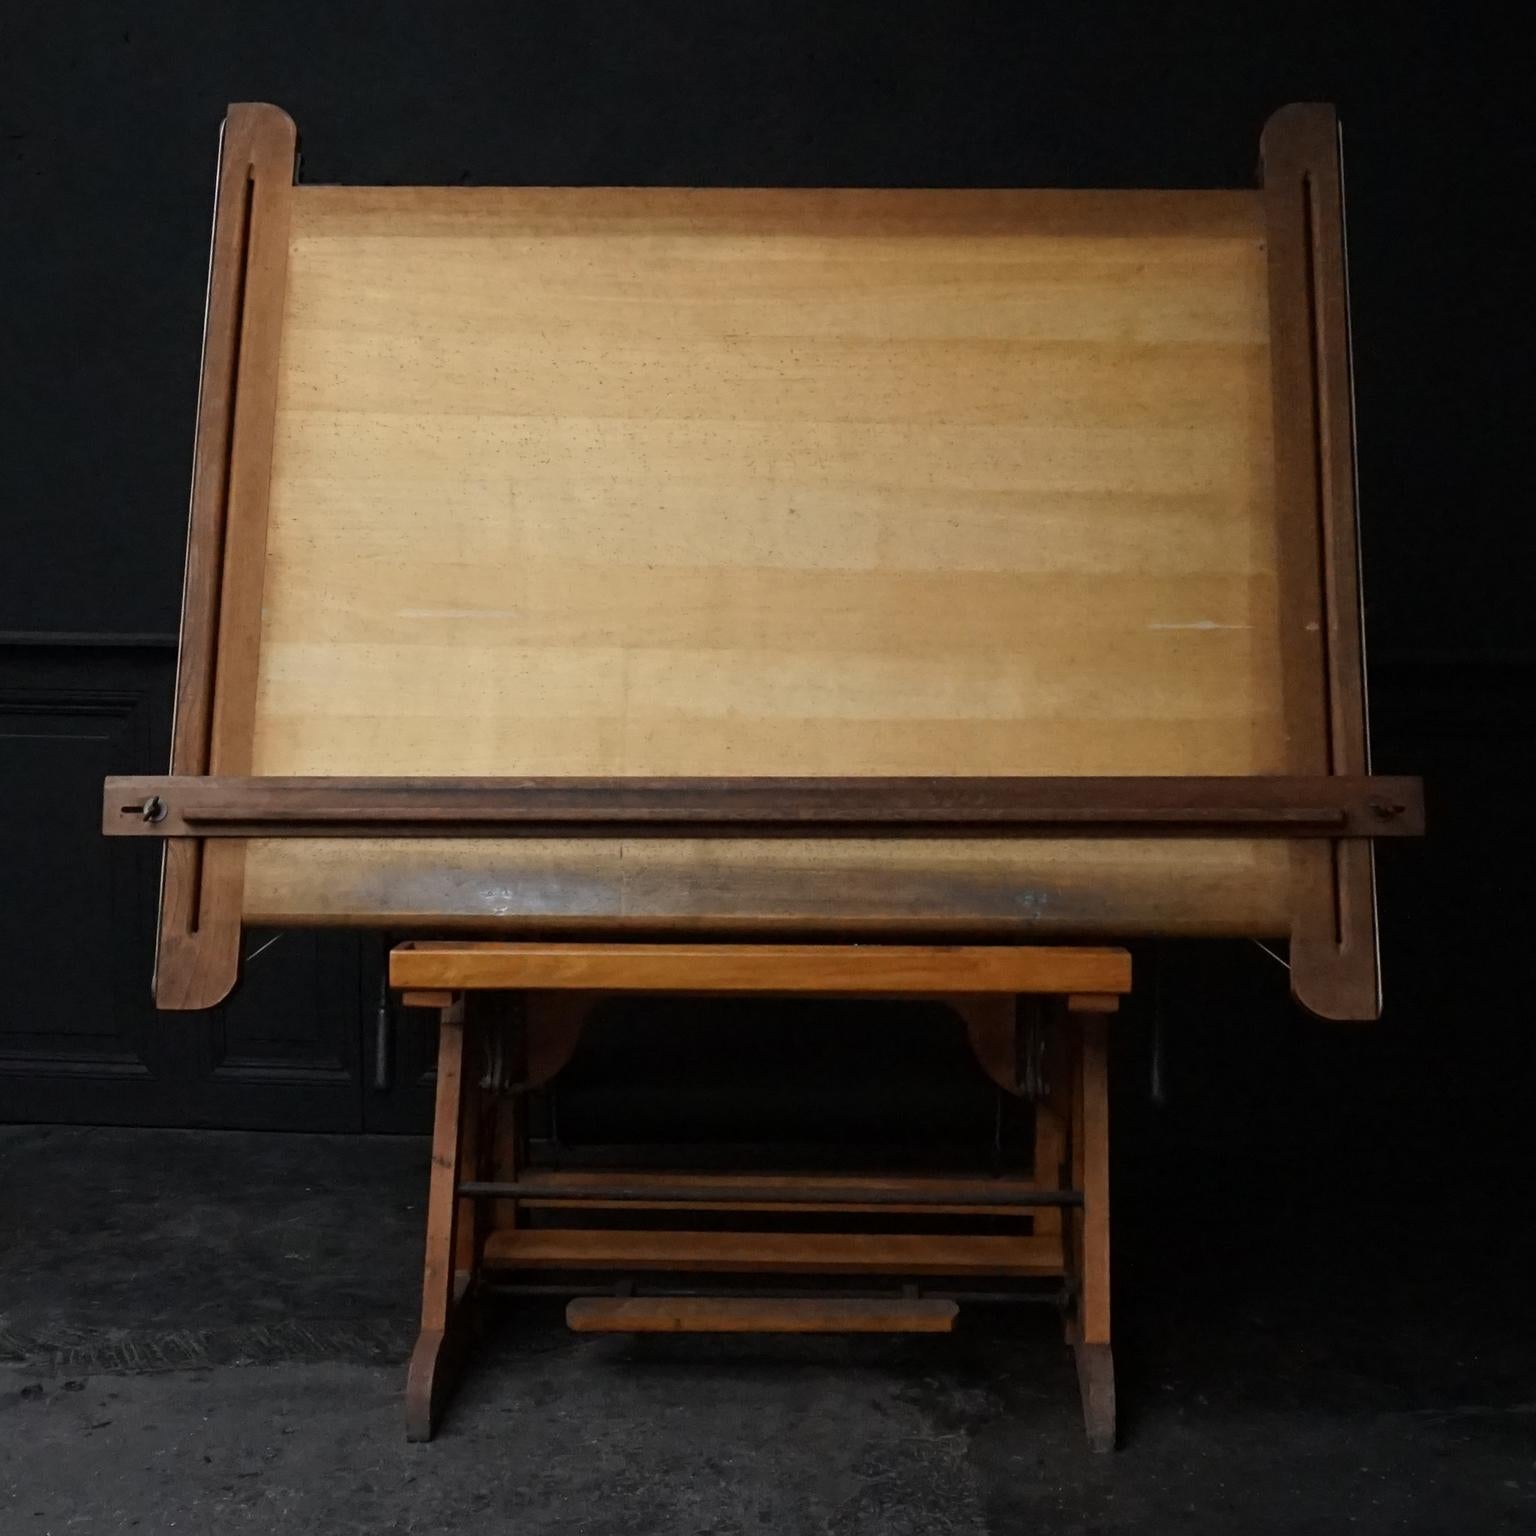 This unique very heavy industrial wooden fully tilting architect's drafting table was a pretty exclusive and cool table around the 1920s and it still is!
It changes easily from one position to another and in height by using the levers and the foot